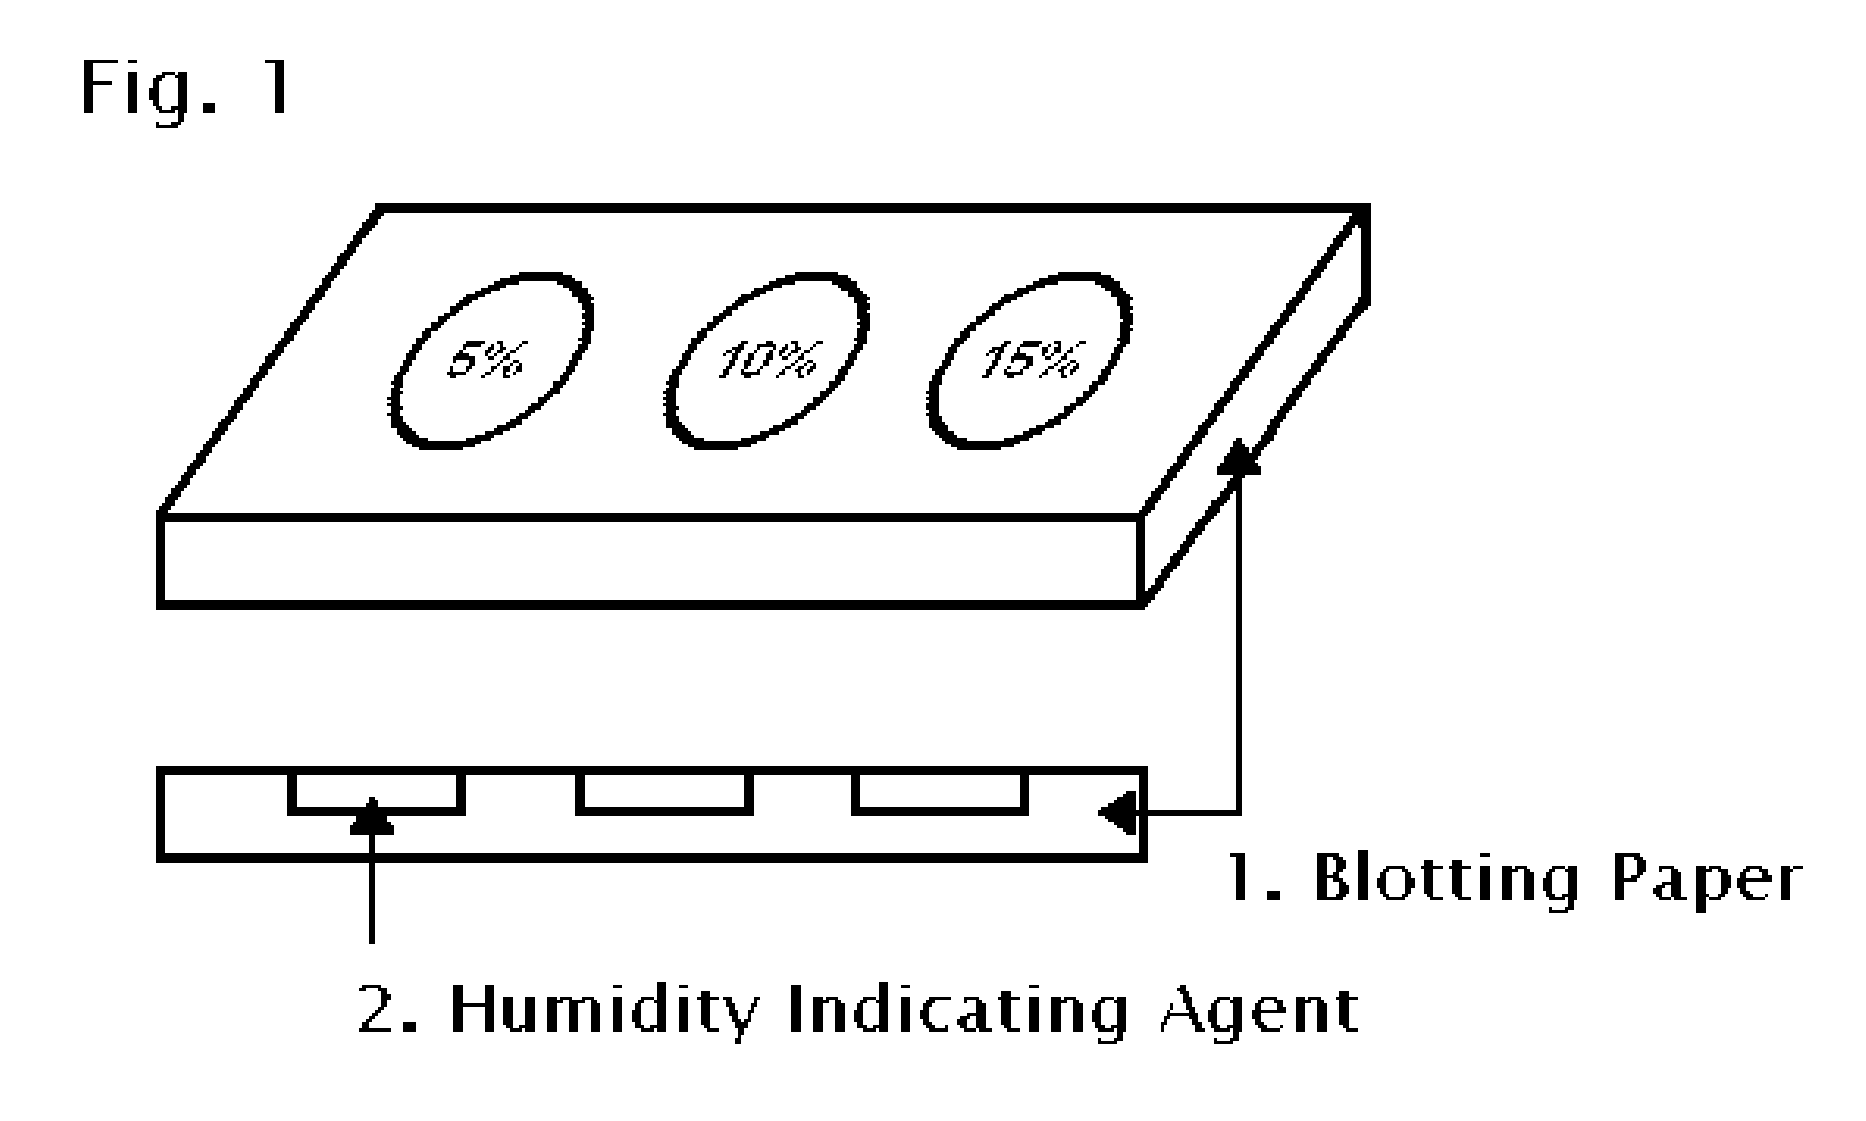 Compositon for non-toxic, non-hazardous, and environmentally friendly humidity-indicating agent and its application